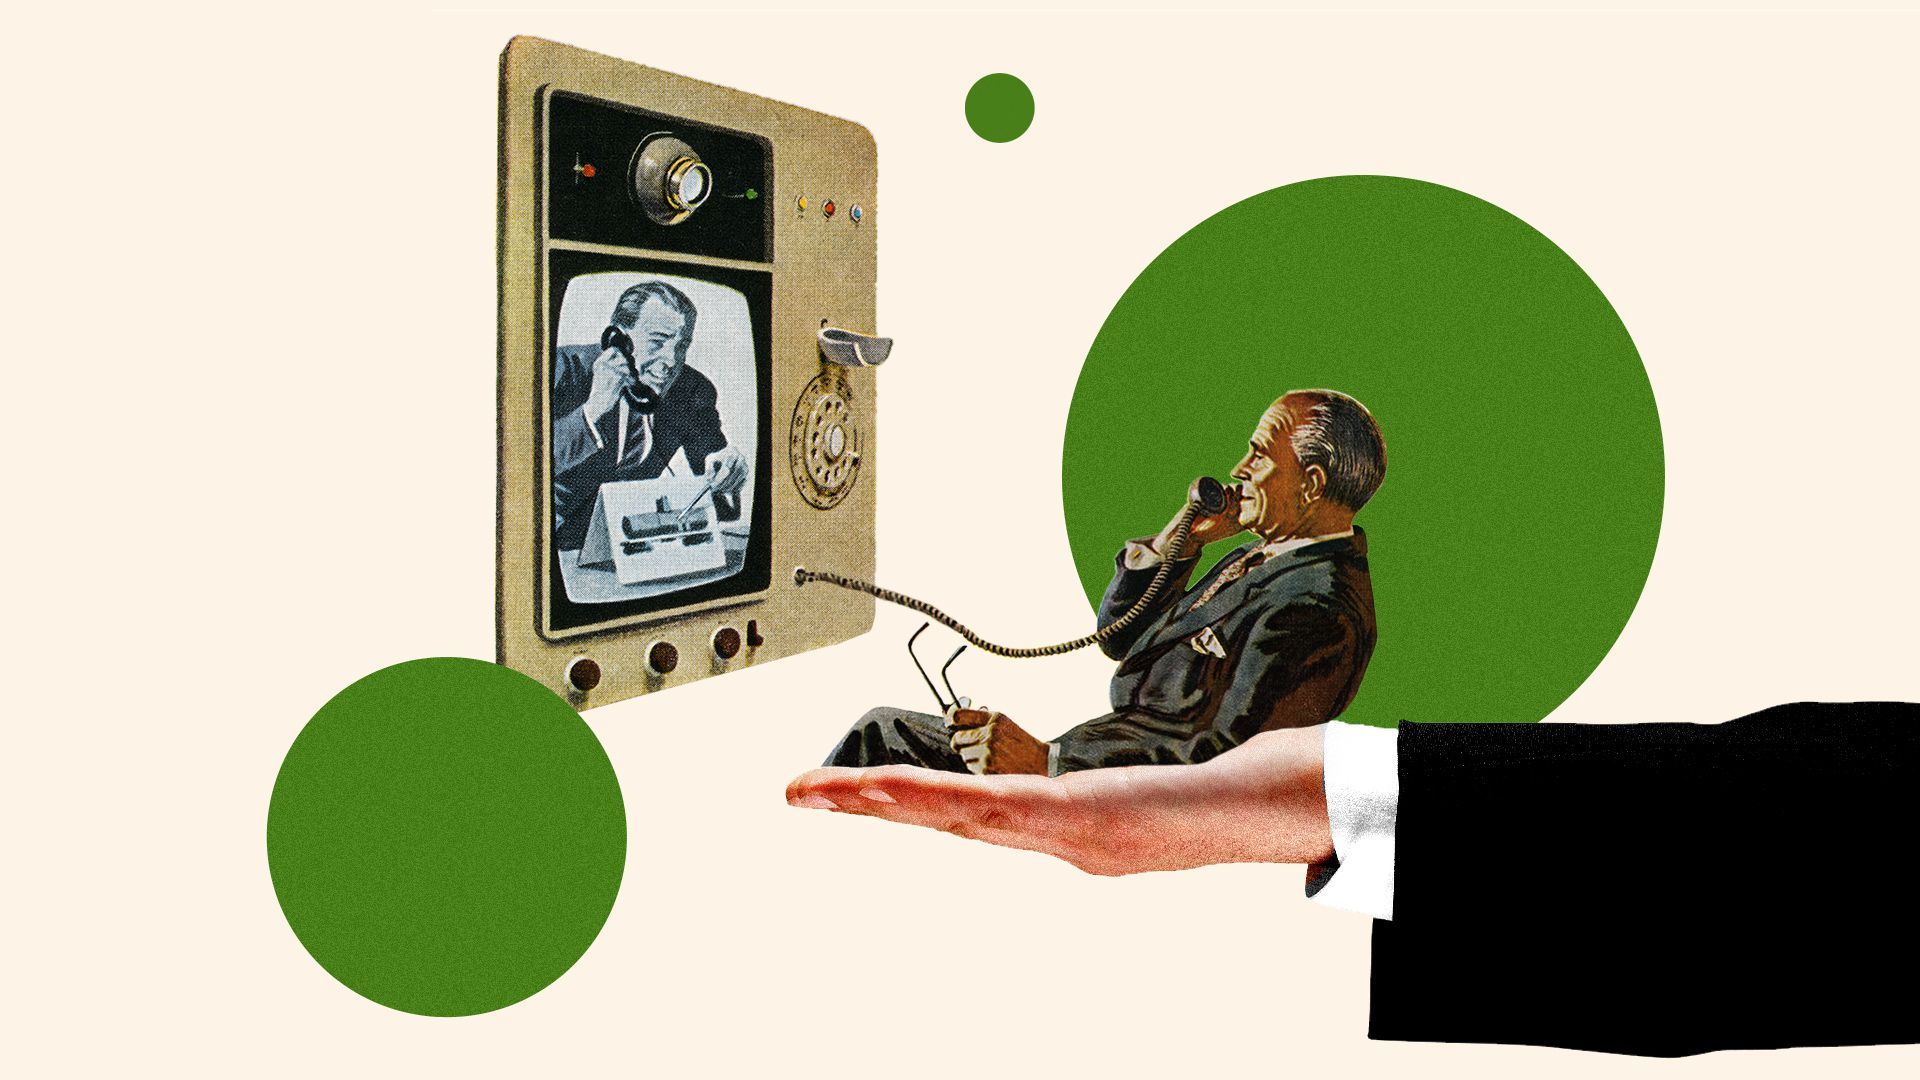 Photo collage of an archival photo of a man on a video phone being held by an outstretched arm.   